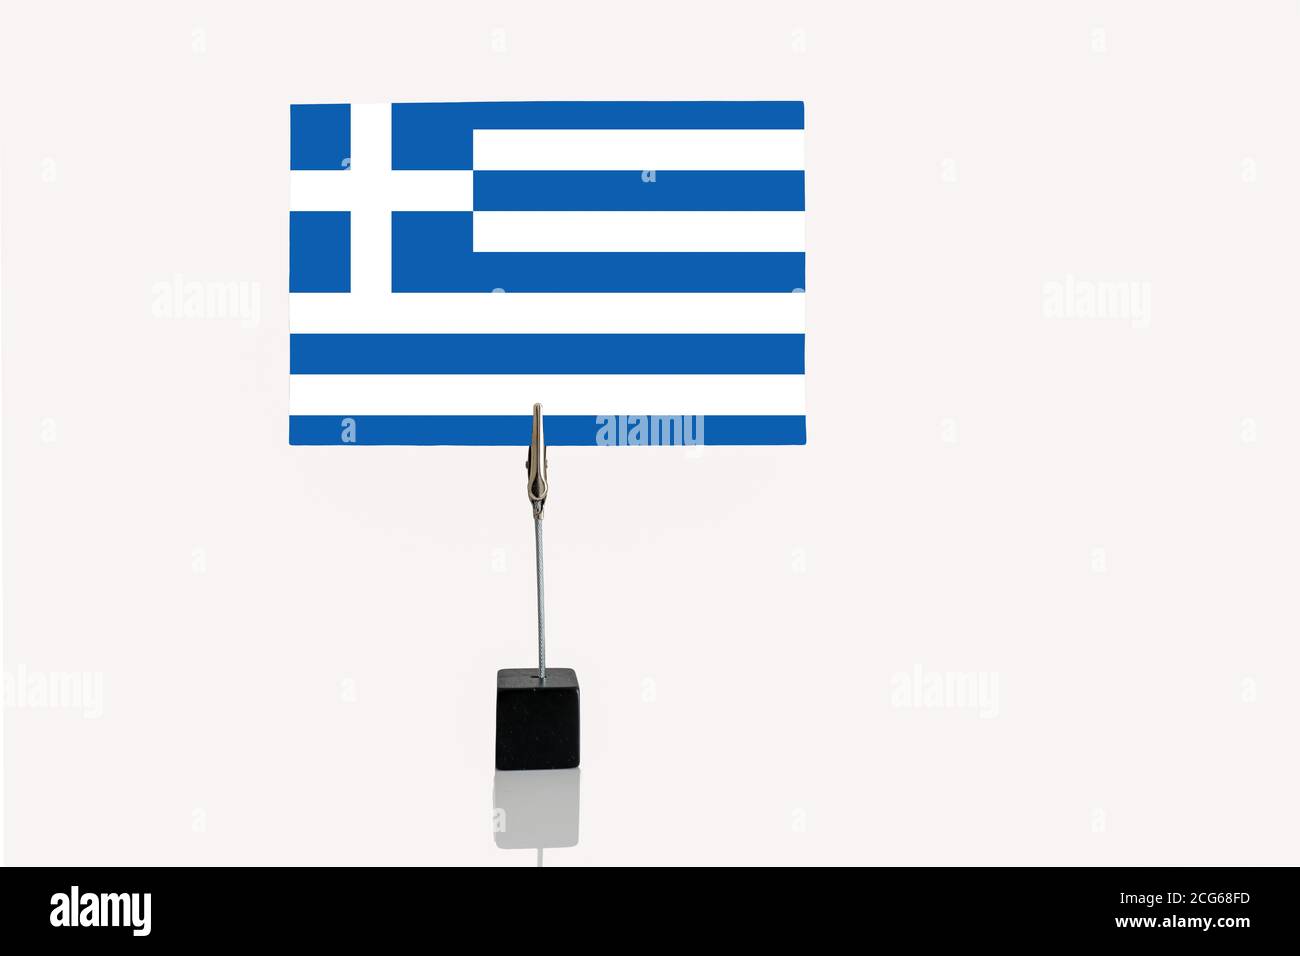 Hellenic Republic High Resolution Stock Photography and Images - Alamy